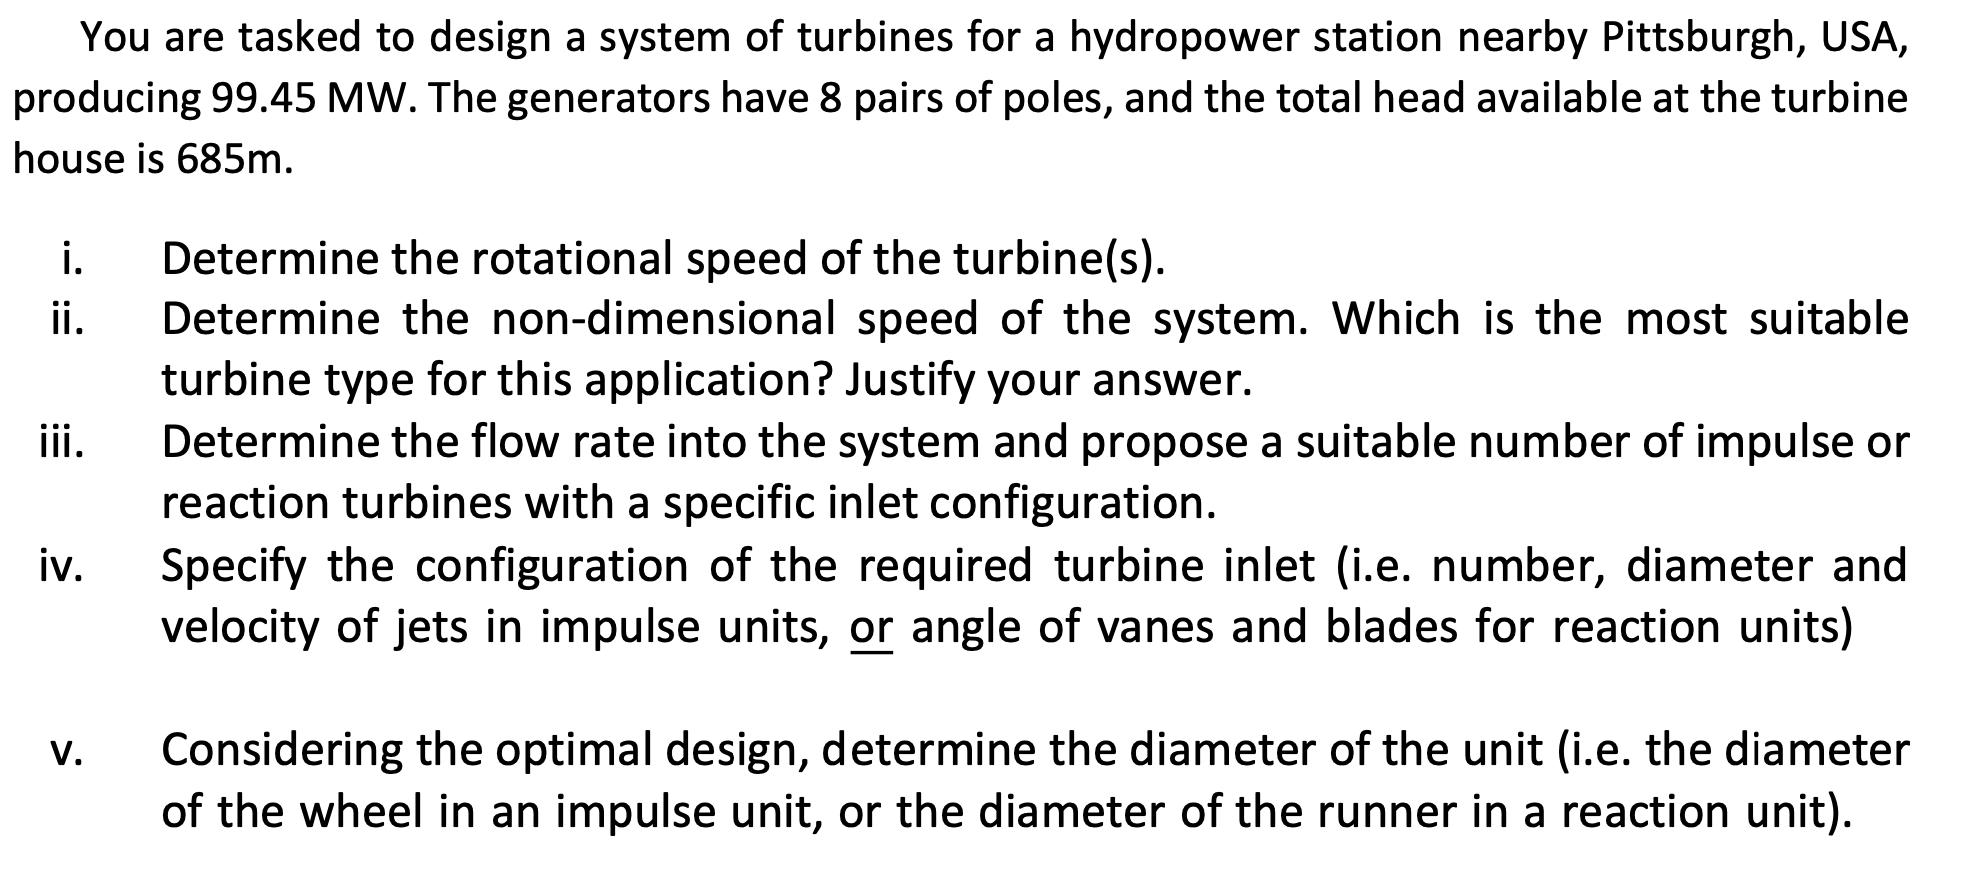 You are tasked to design a system of turbines for a hydropower station nearby Pittsburgh, USA, producing